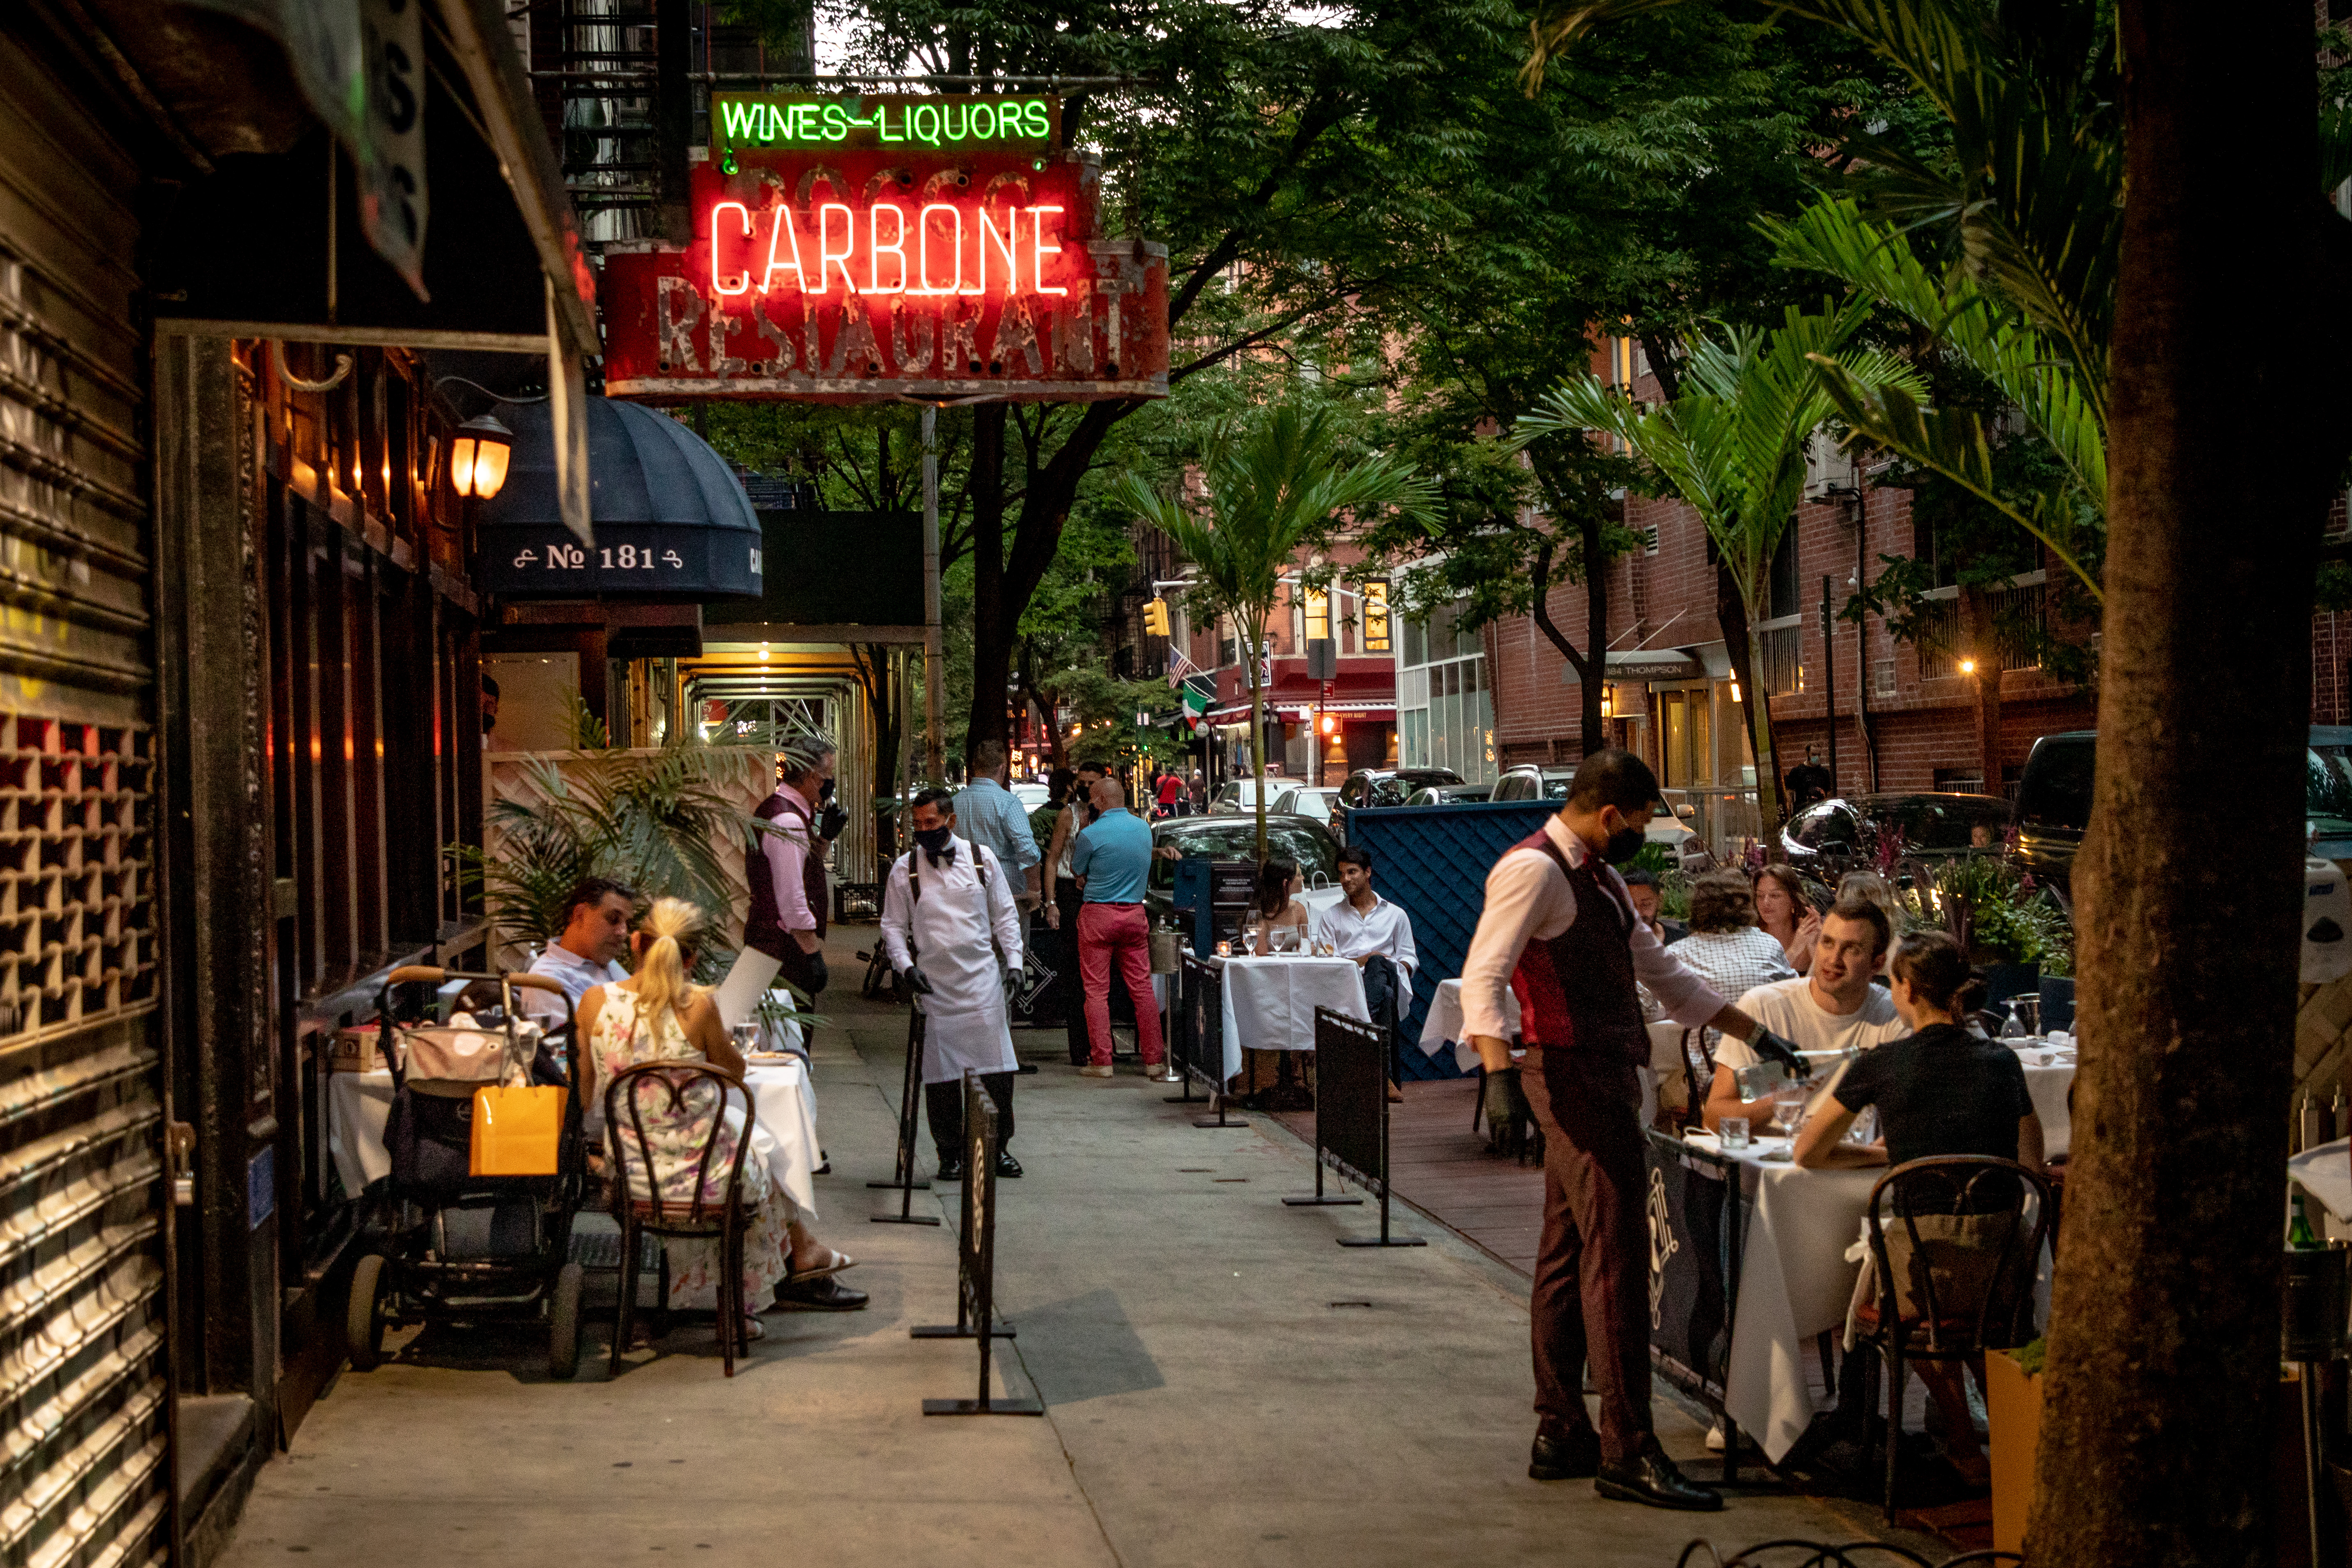 Waiters attend to groups of diners sitting at outdoor tables on a tree-lined street. To the left, a neon illuminated sign “Wines Liquors Carbone” shines.